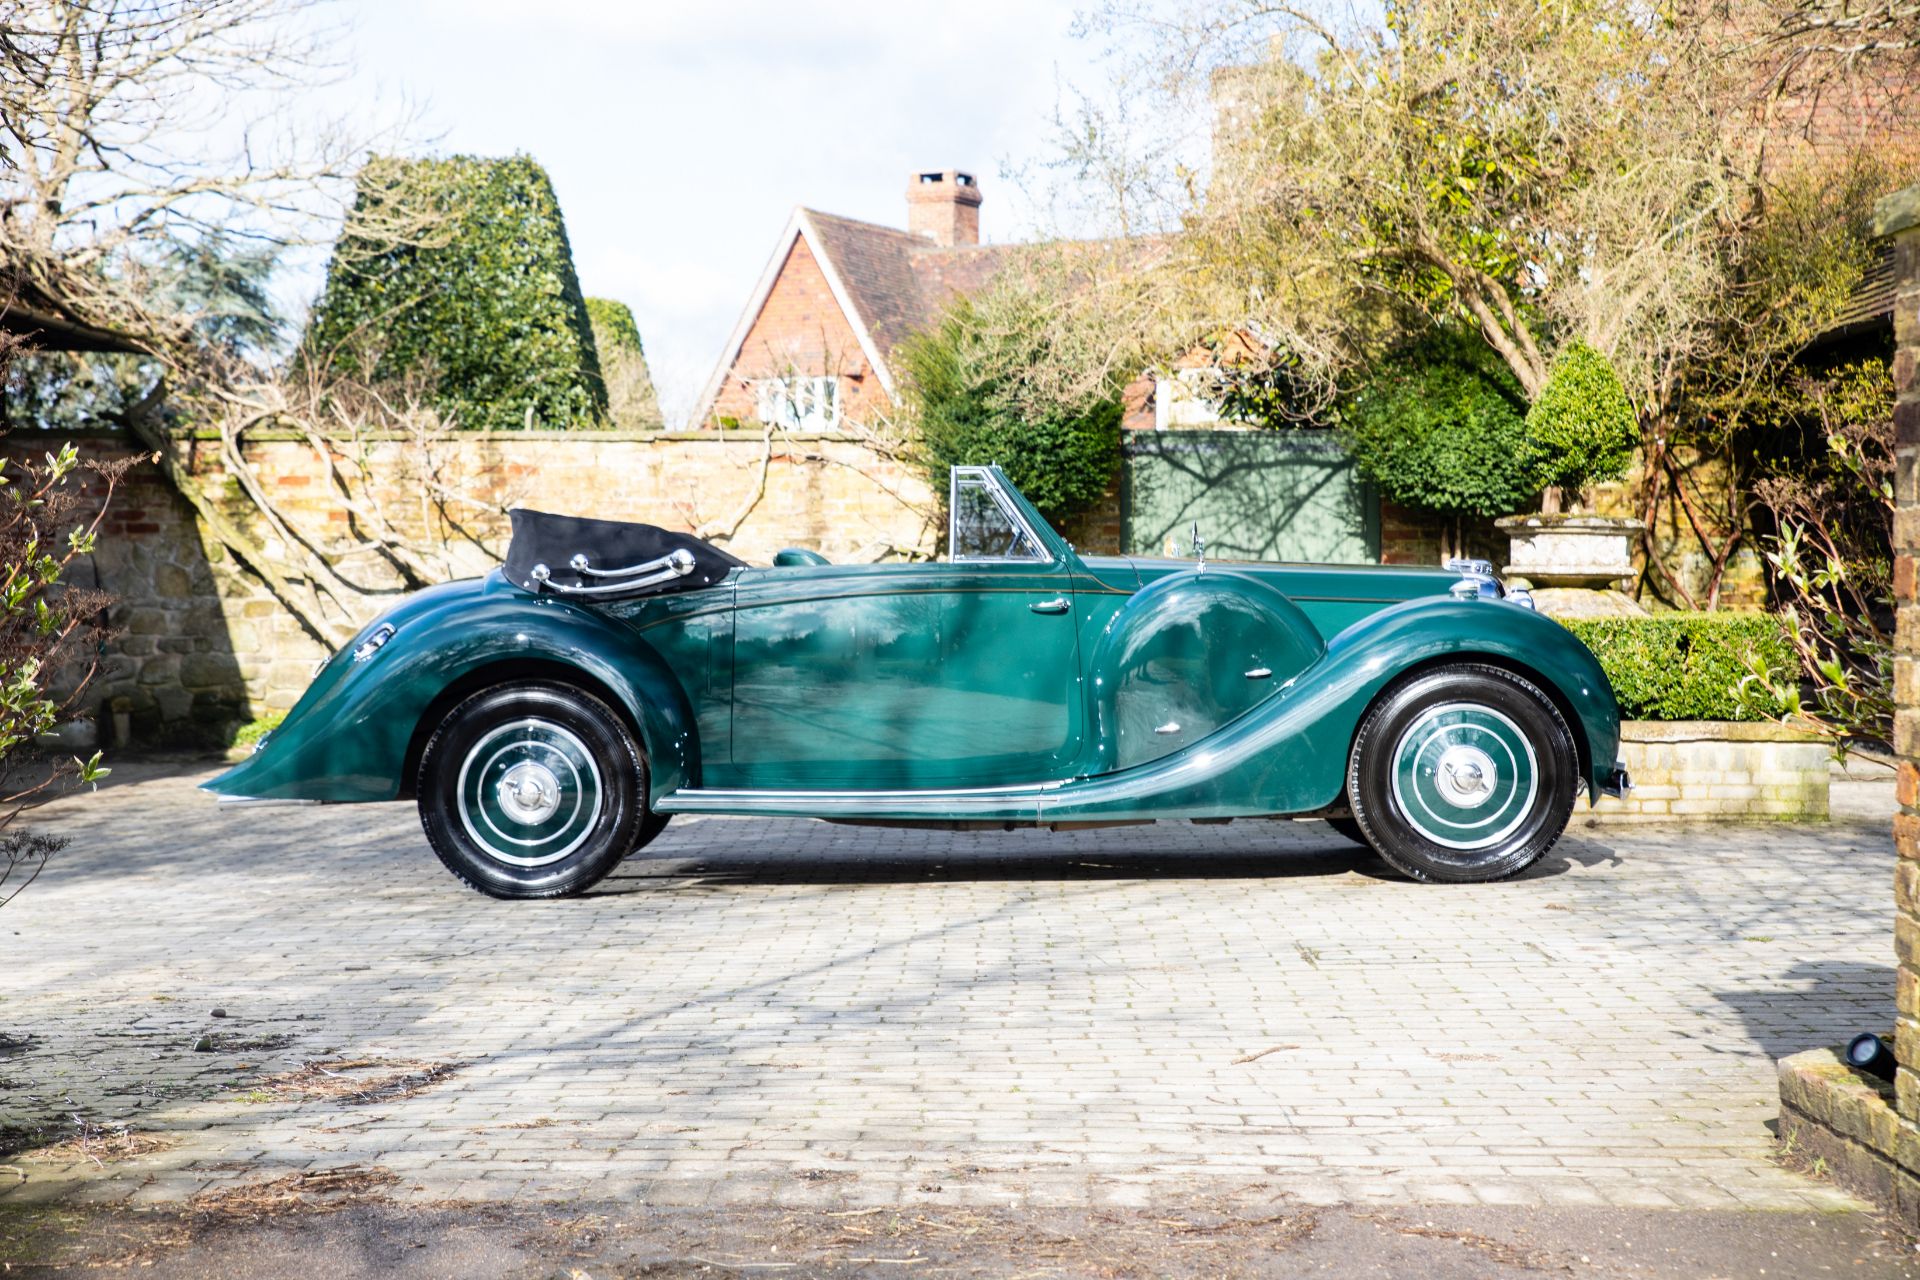 Offered from the estate of the late Michael Patrick Aiken, MBE,1939 Lagonda V12 Drophead Coupé C... - Bild 9 aus 64